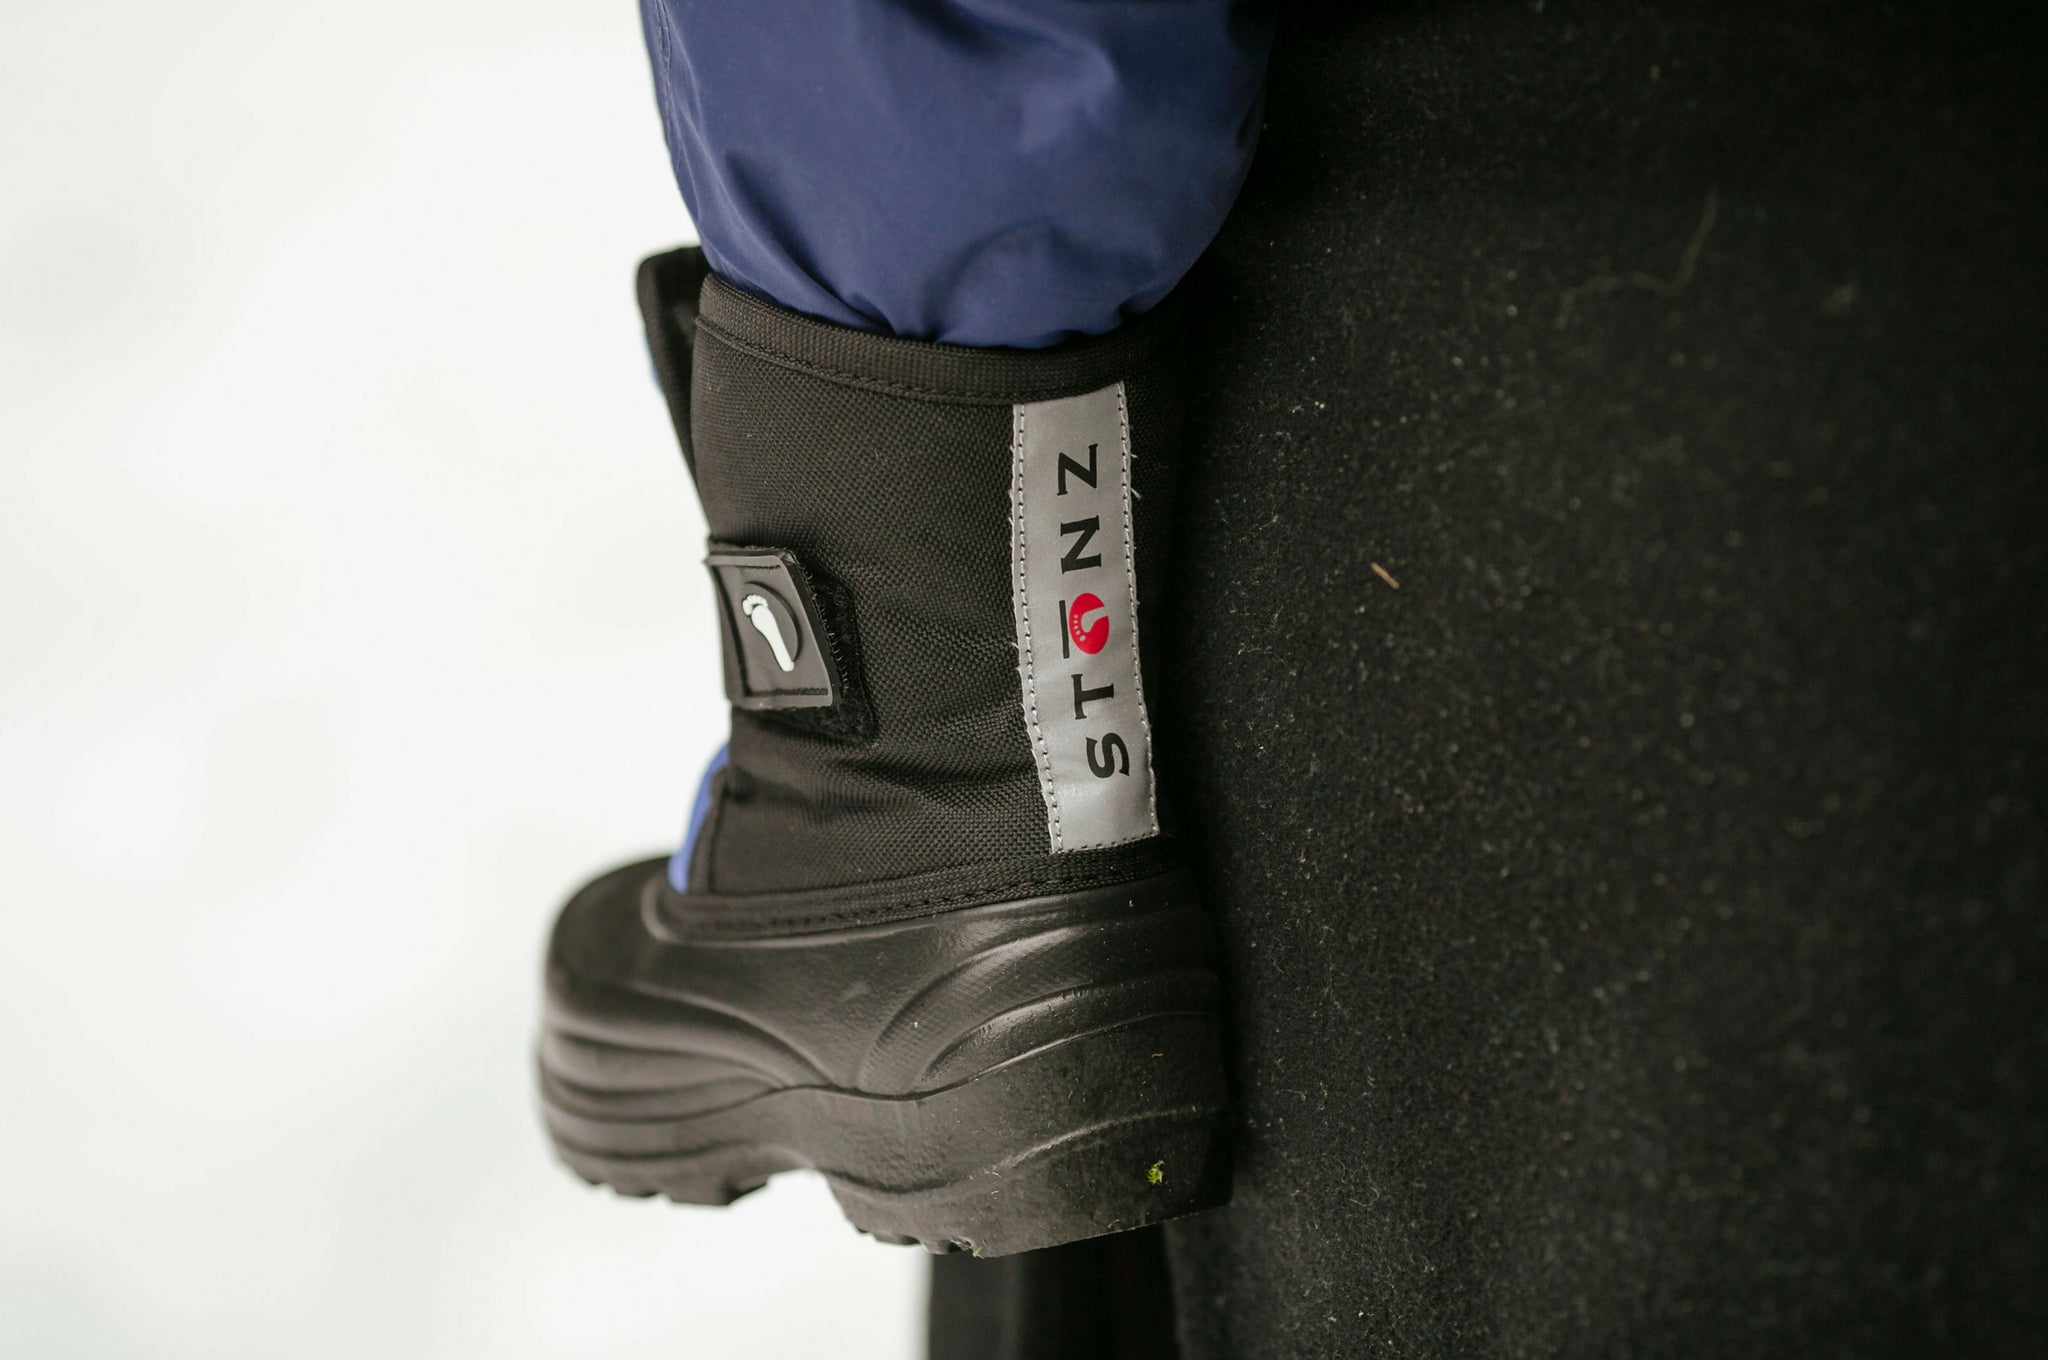 Scout Winter Boots - Grey/Black - Reflective | Stonz | Weather-resistant  Shoes for Toddlers